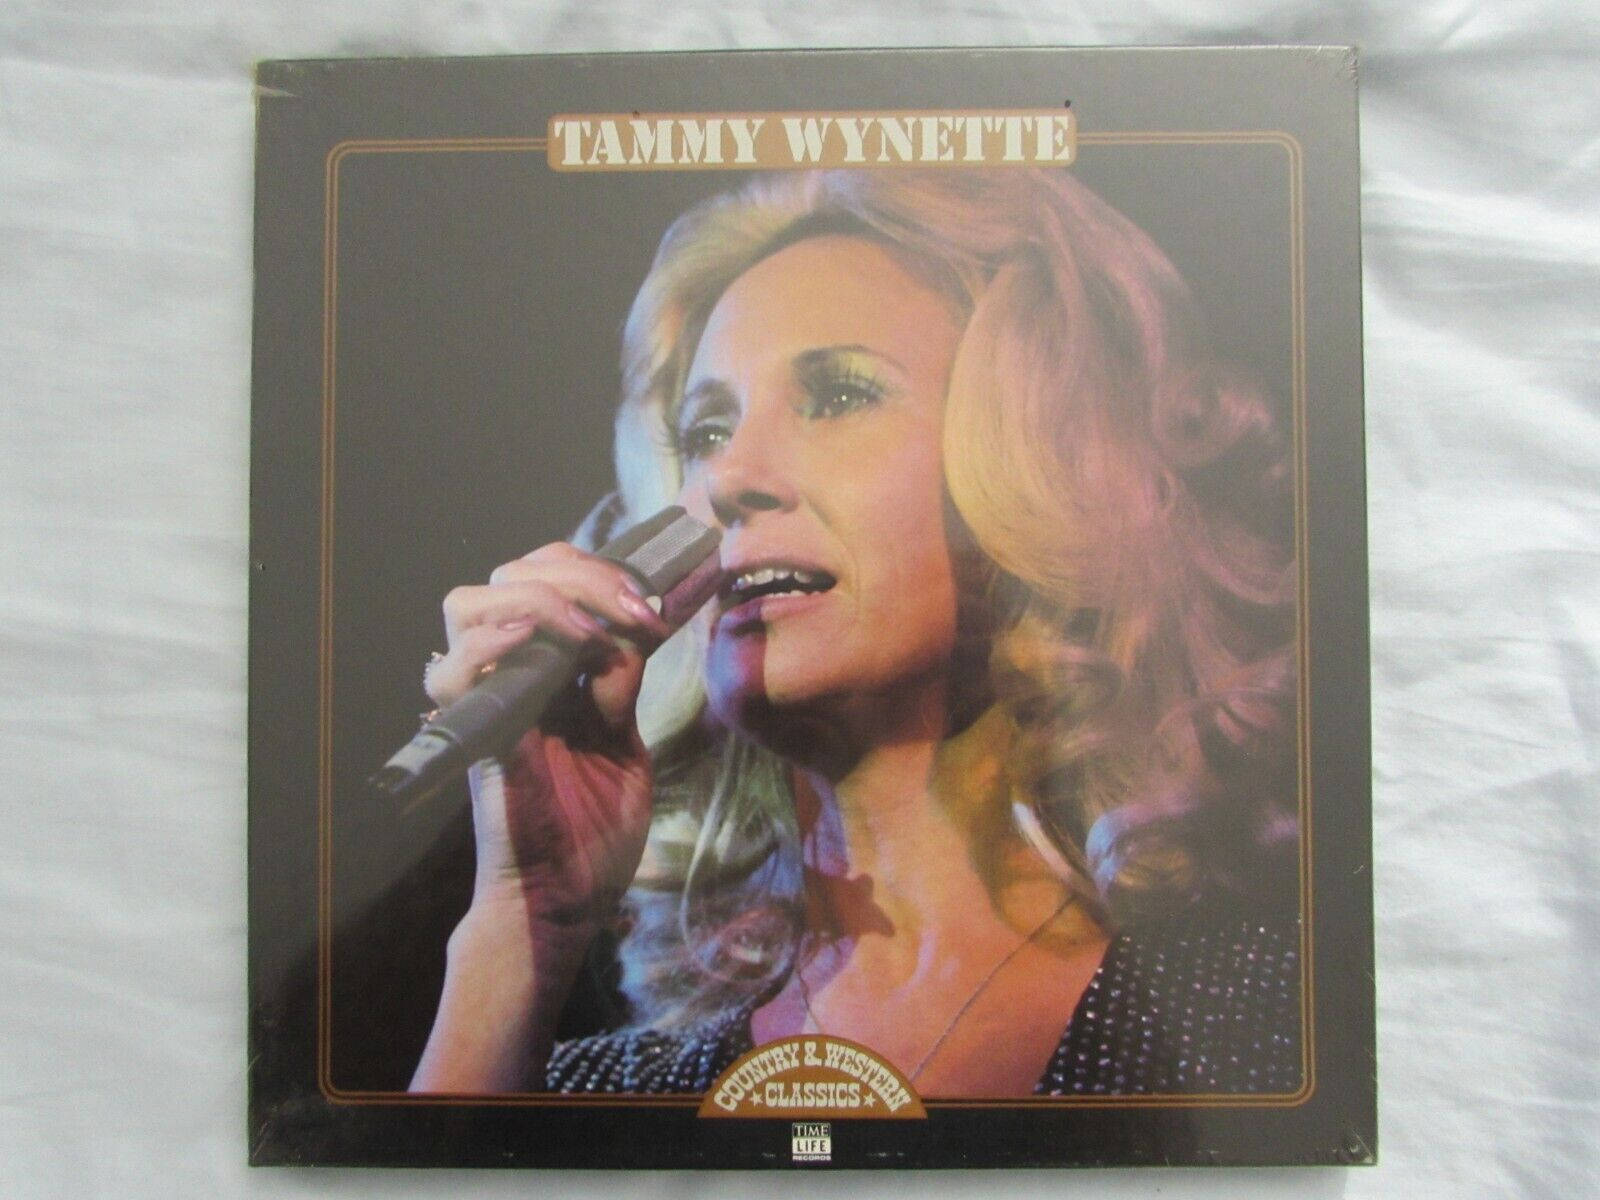 Legendary Country Artist Tammy Wynette with her Classic Album Wallpaper